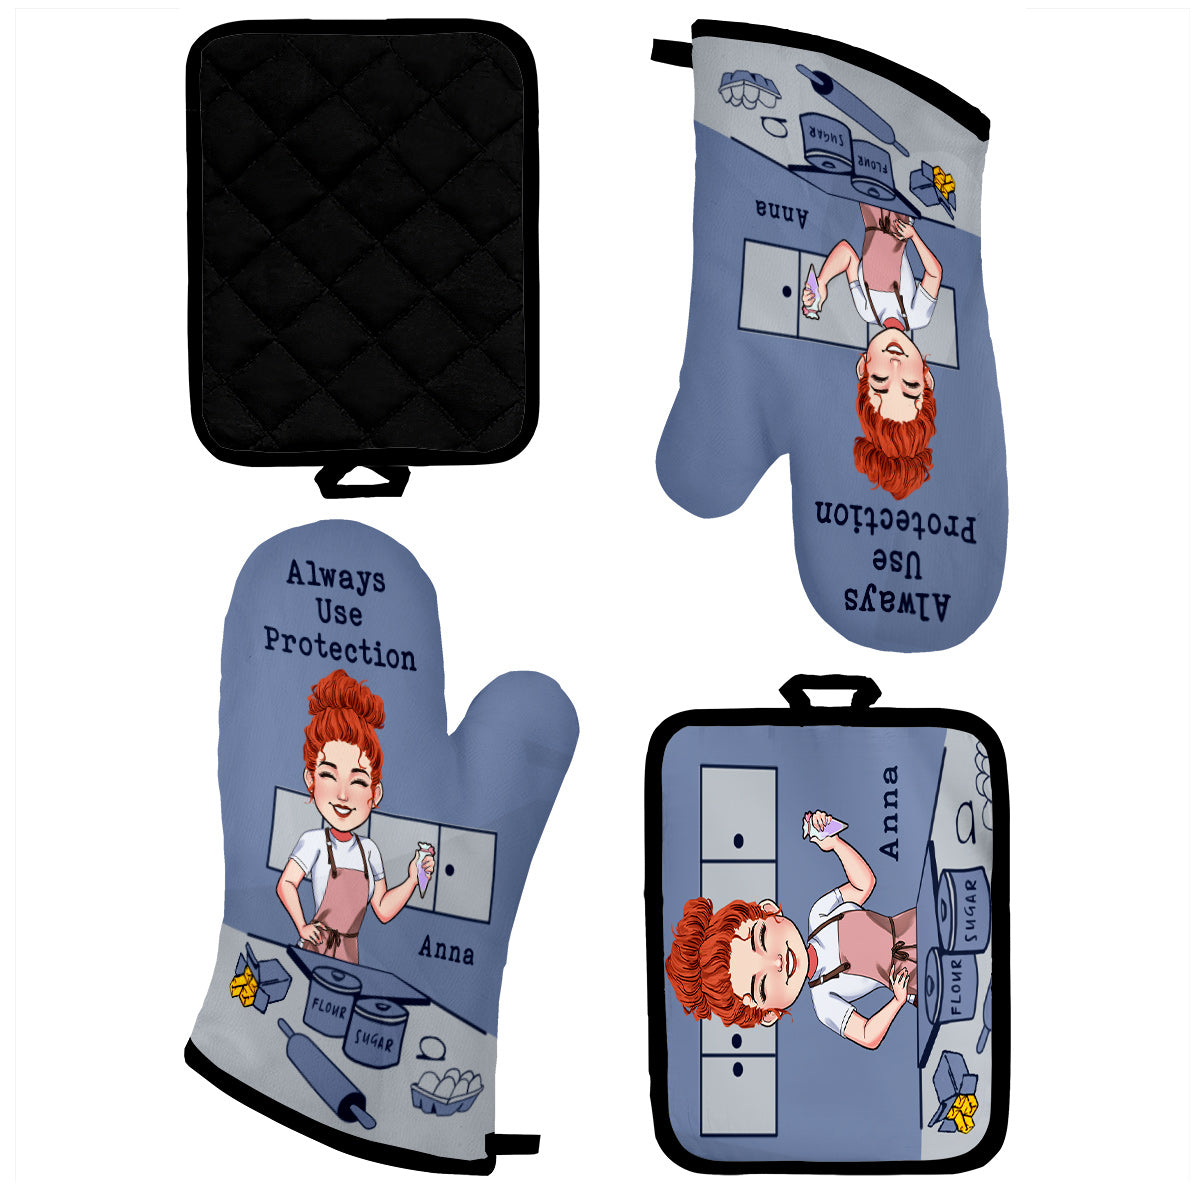 Always Use Protection - Personalized Baking Oven Mitts & Pot Holder Set